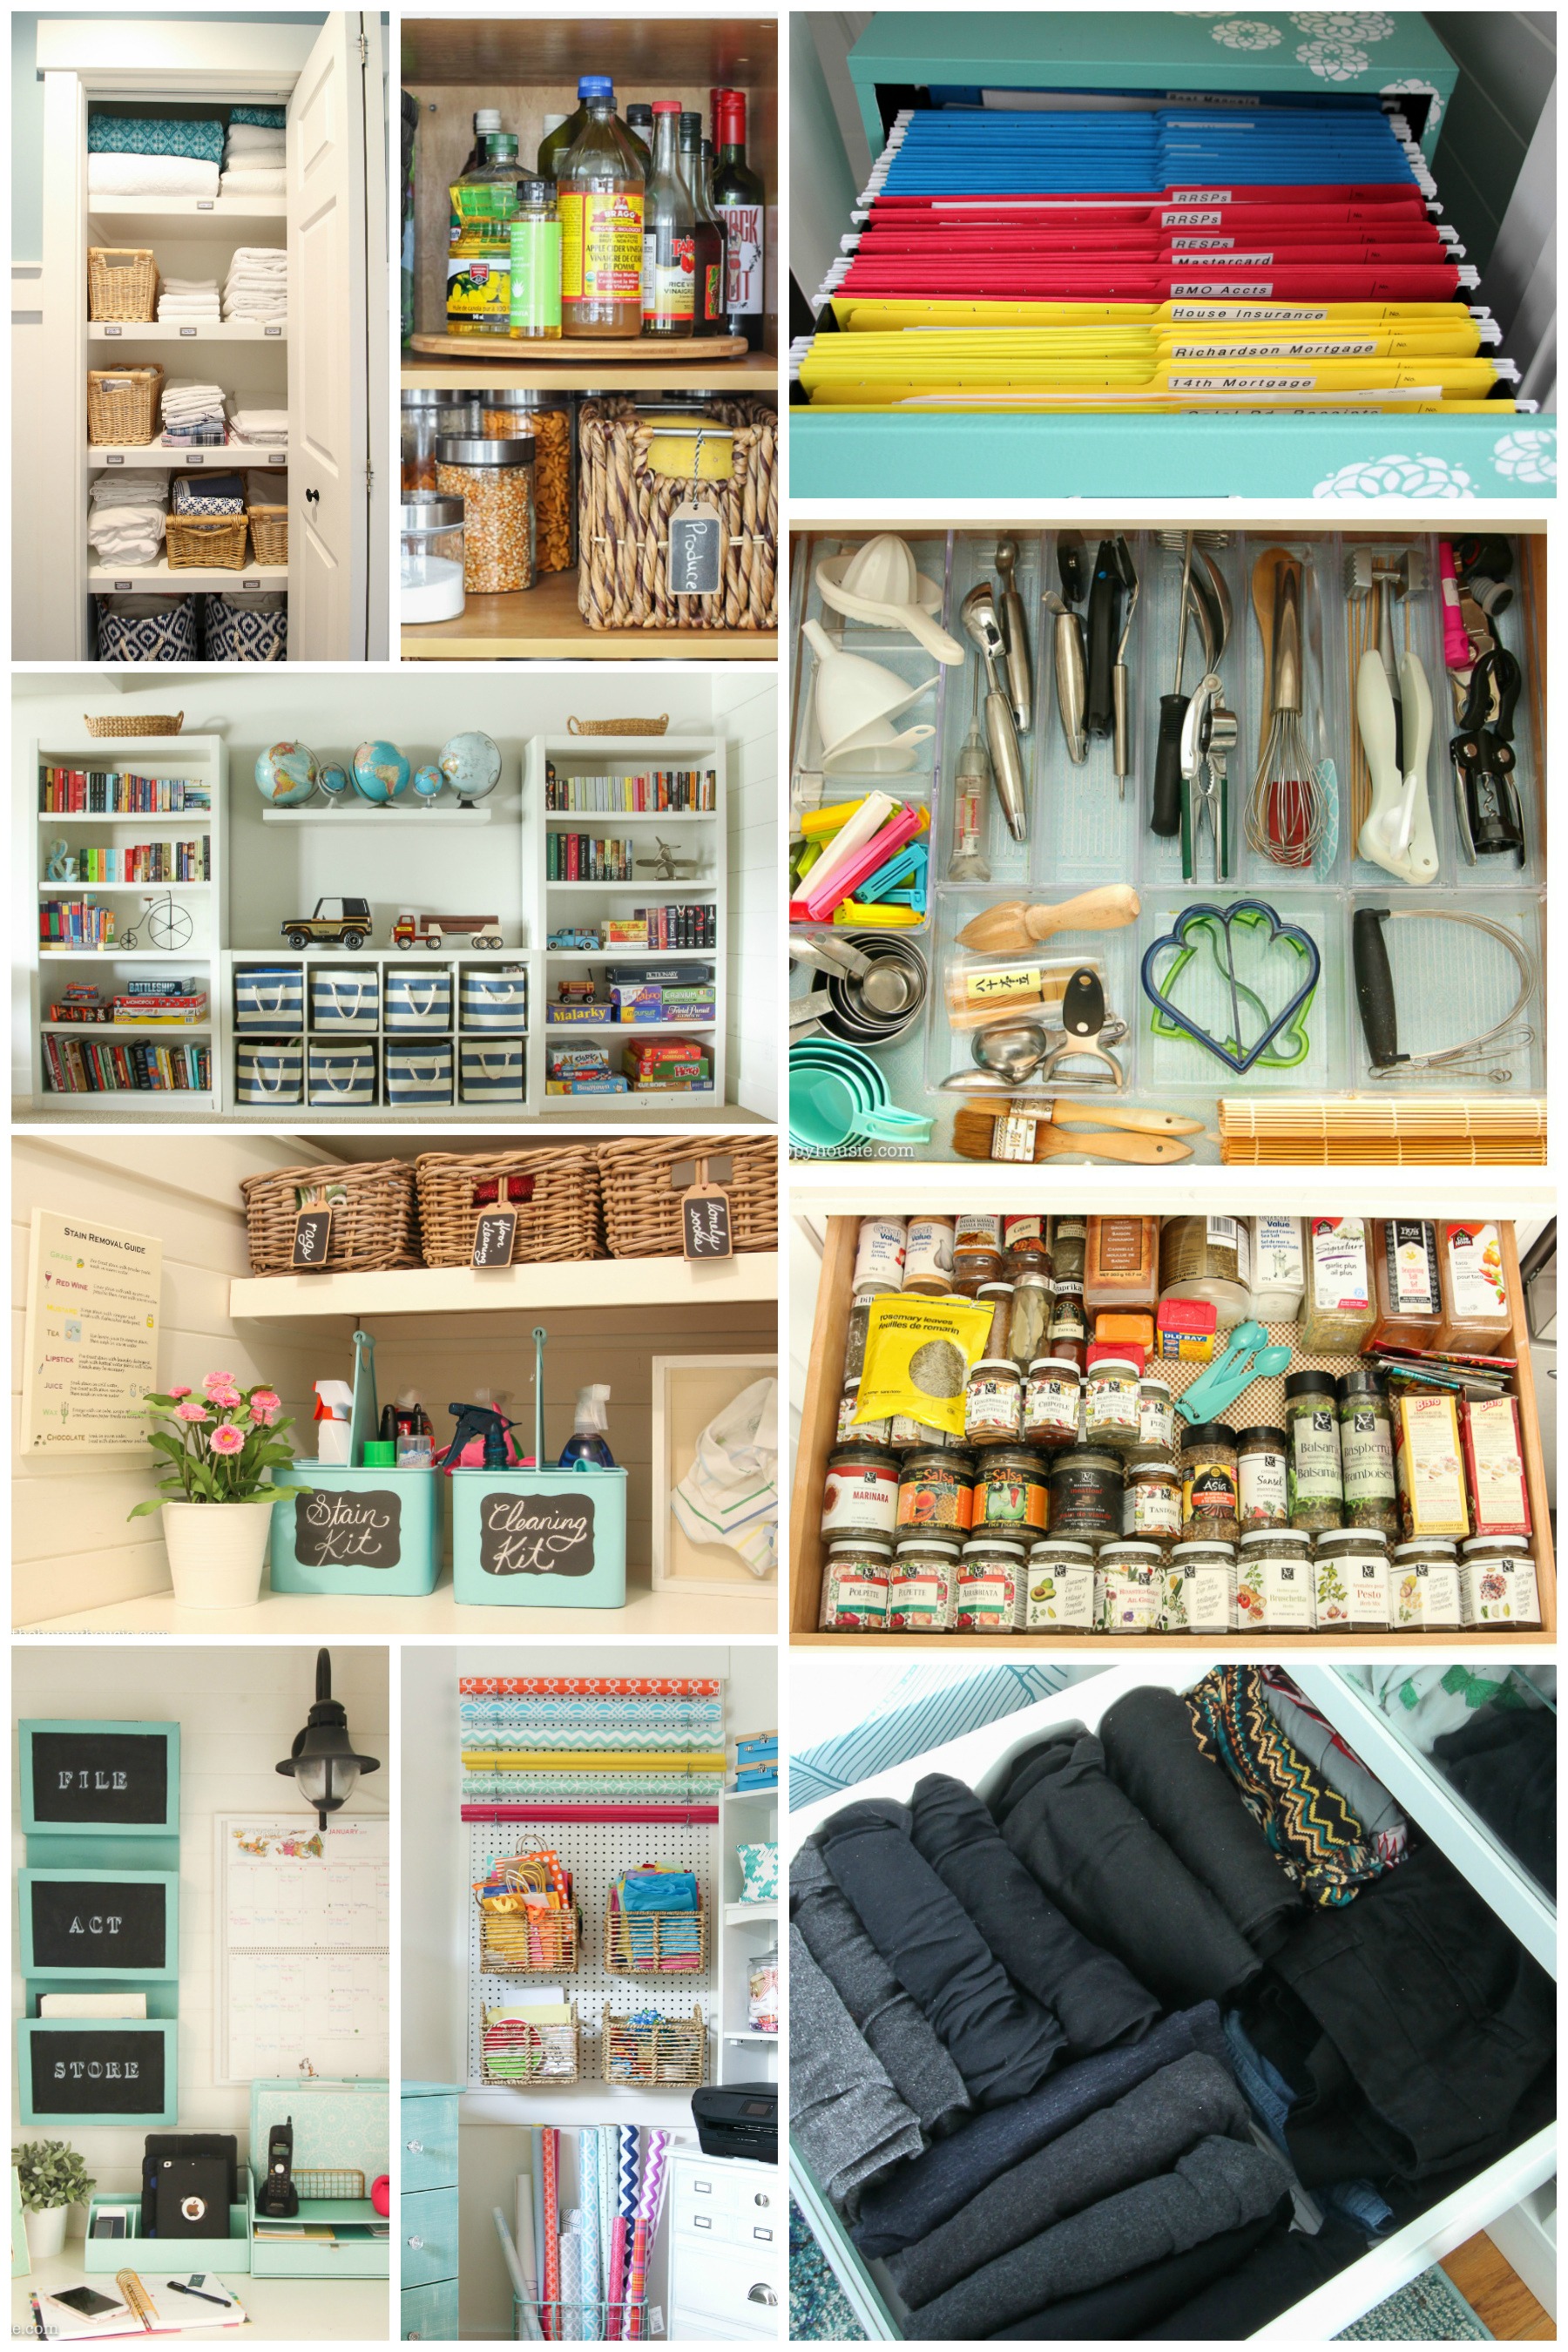 10 Life Changing Home Organization Ideas for the Visual Organizer